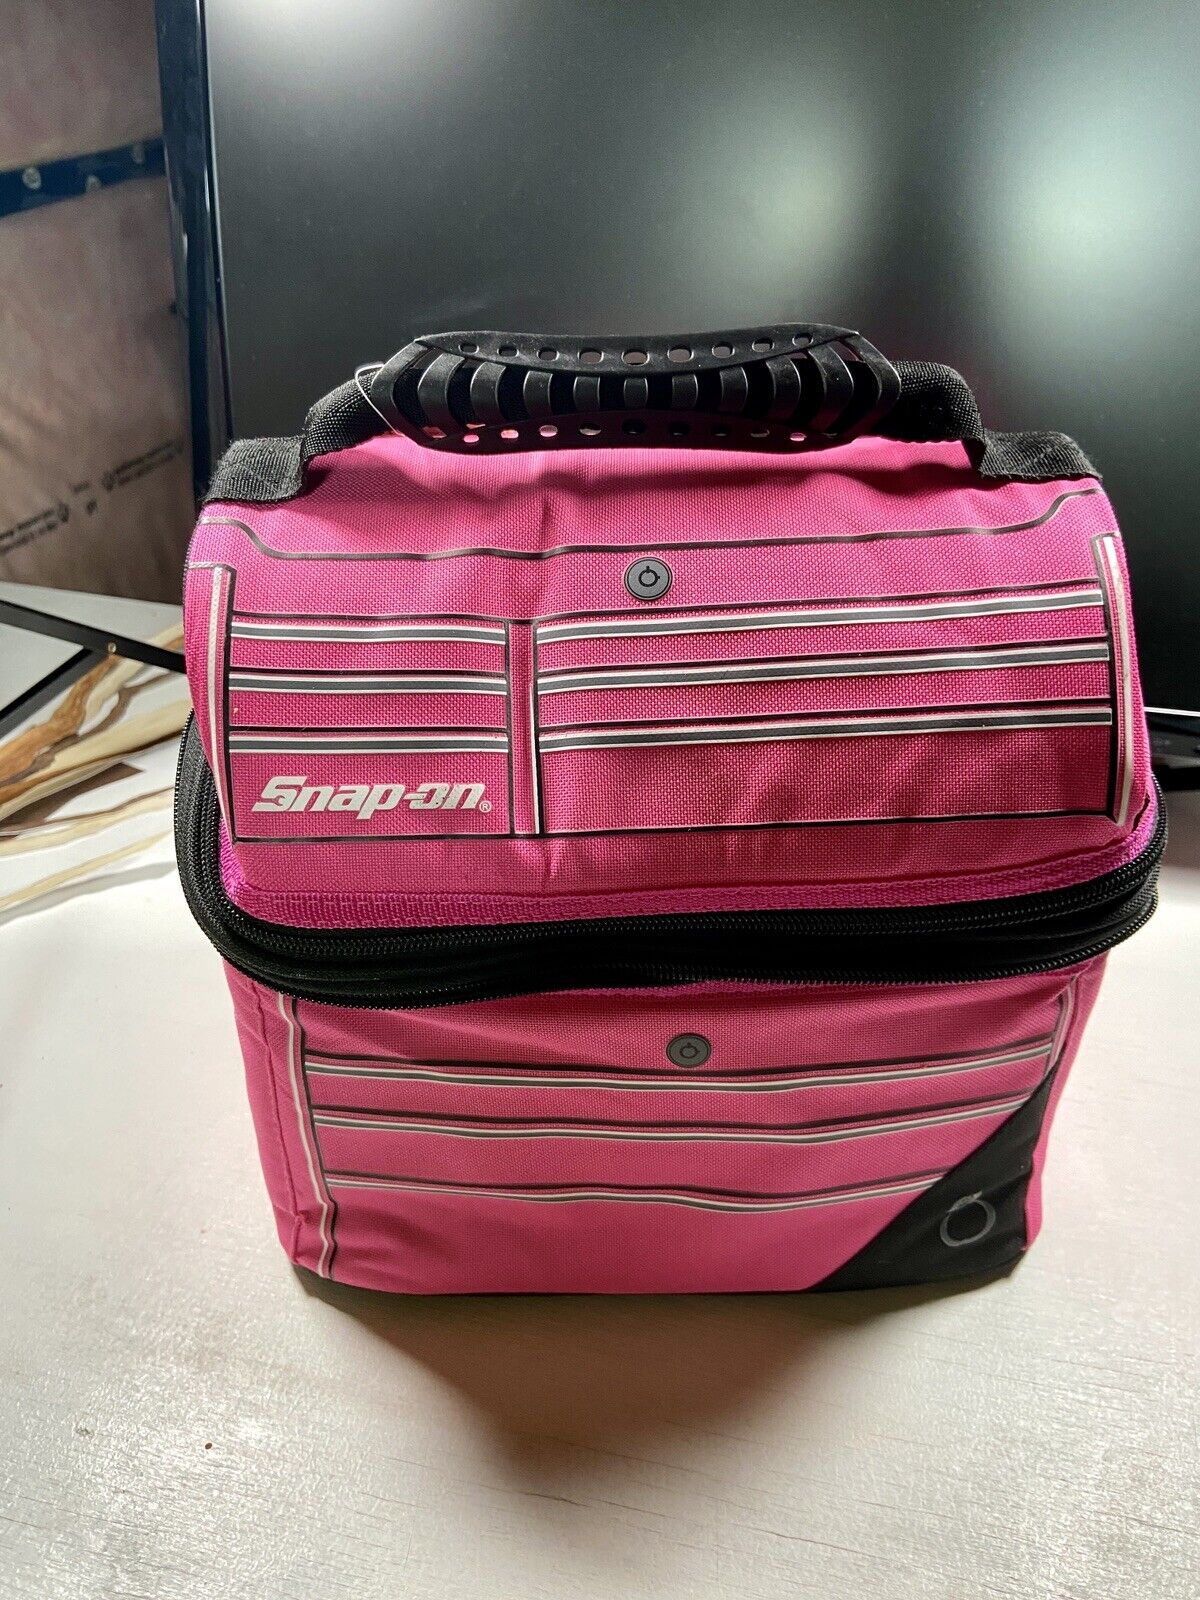 SNAP-ON Toolbox Cooler Bag PINK Rare Limited Edition